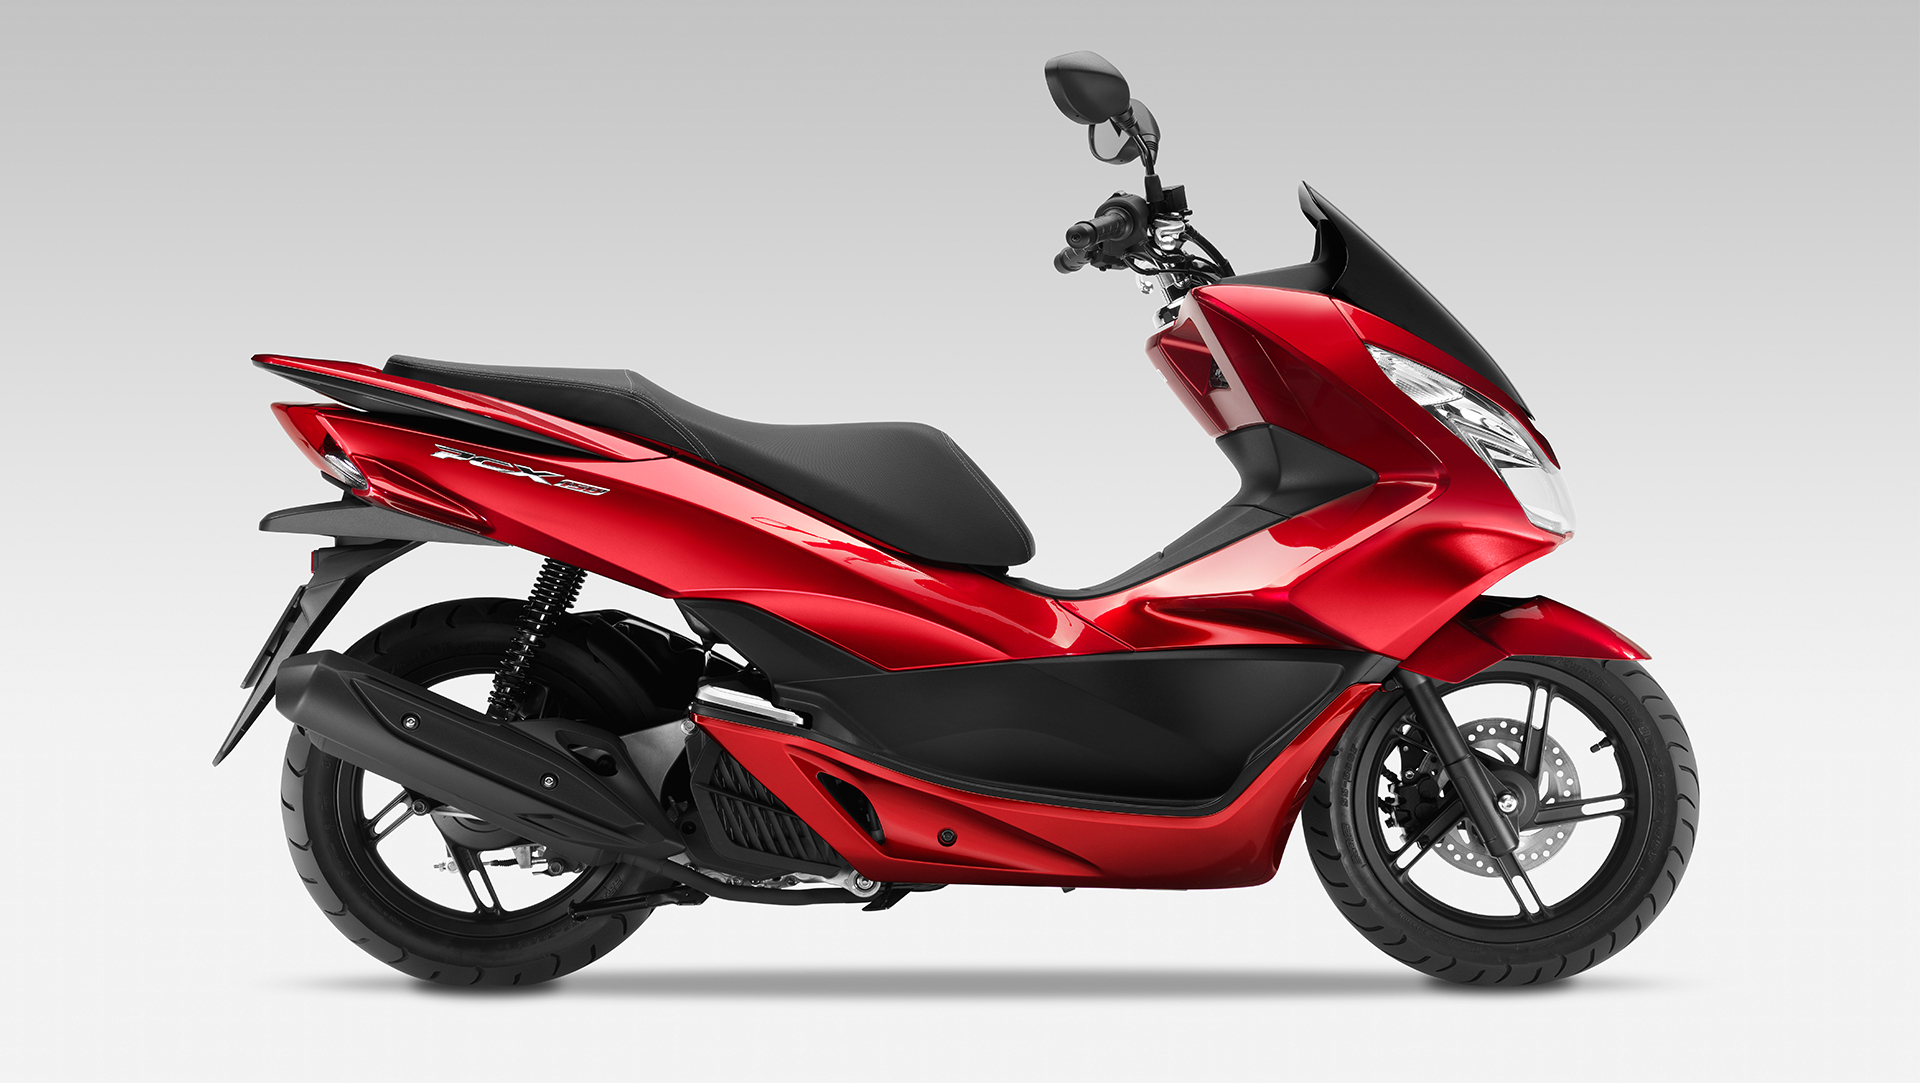 More durable, more powerful maxi-scooters from Honda, the PCX150